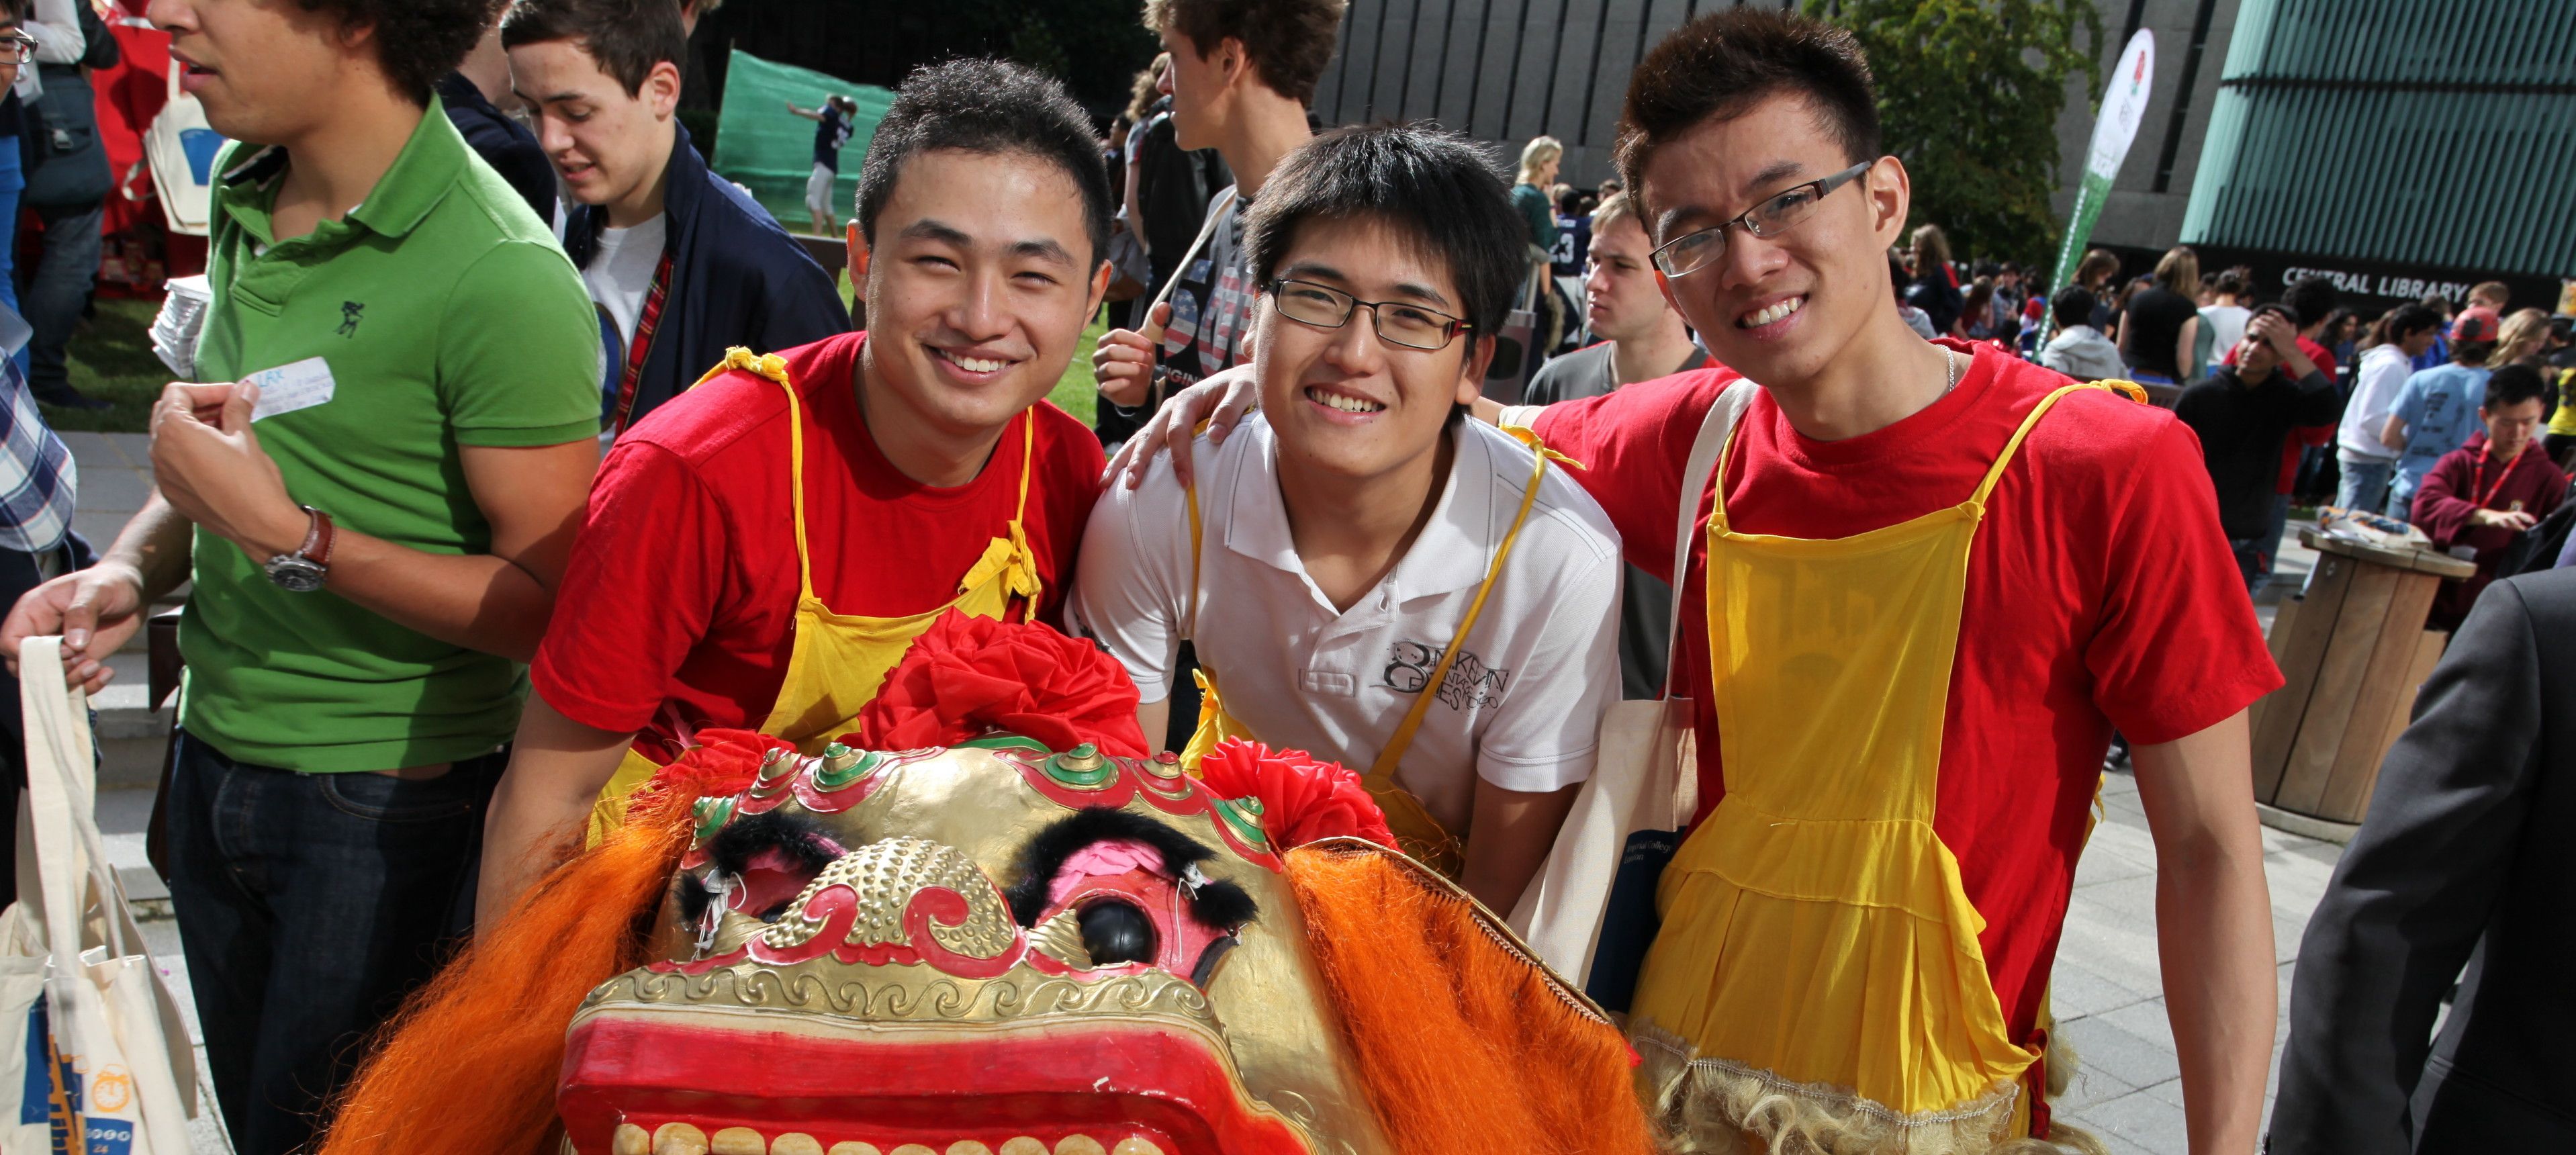 Imperial's Chinese Society at the Welcome Fair